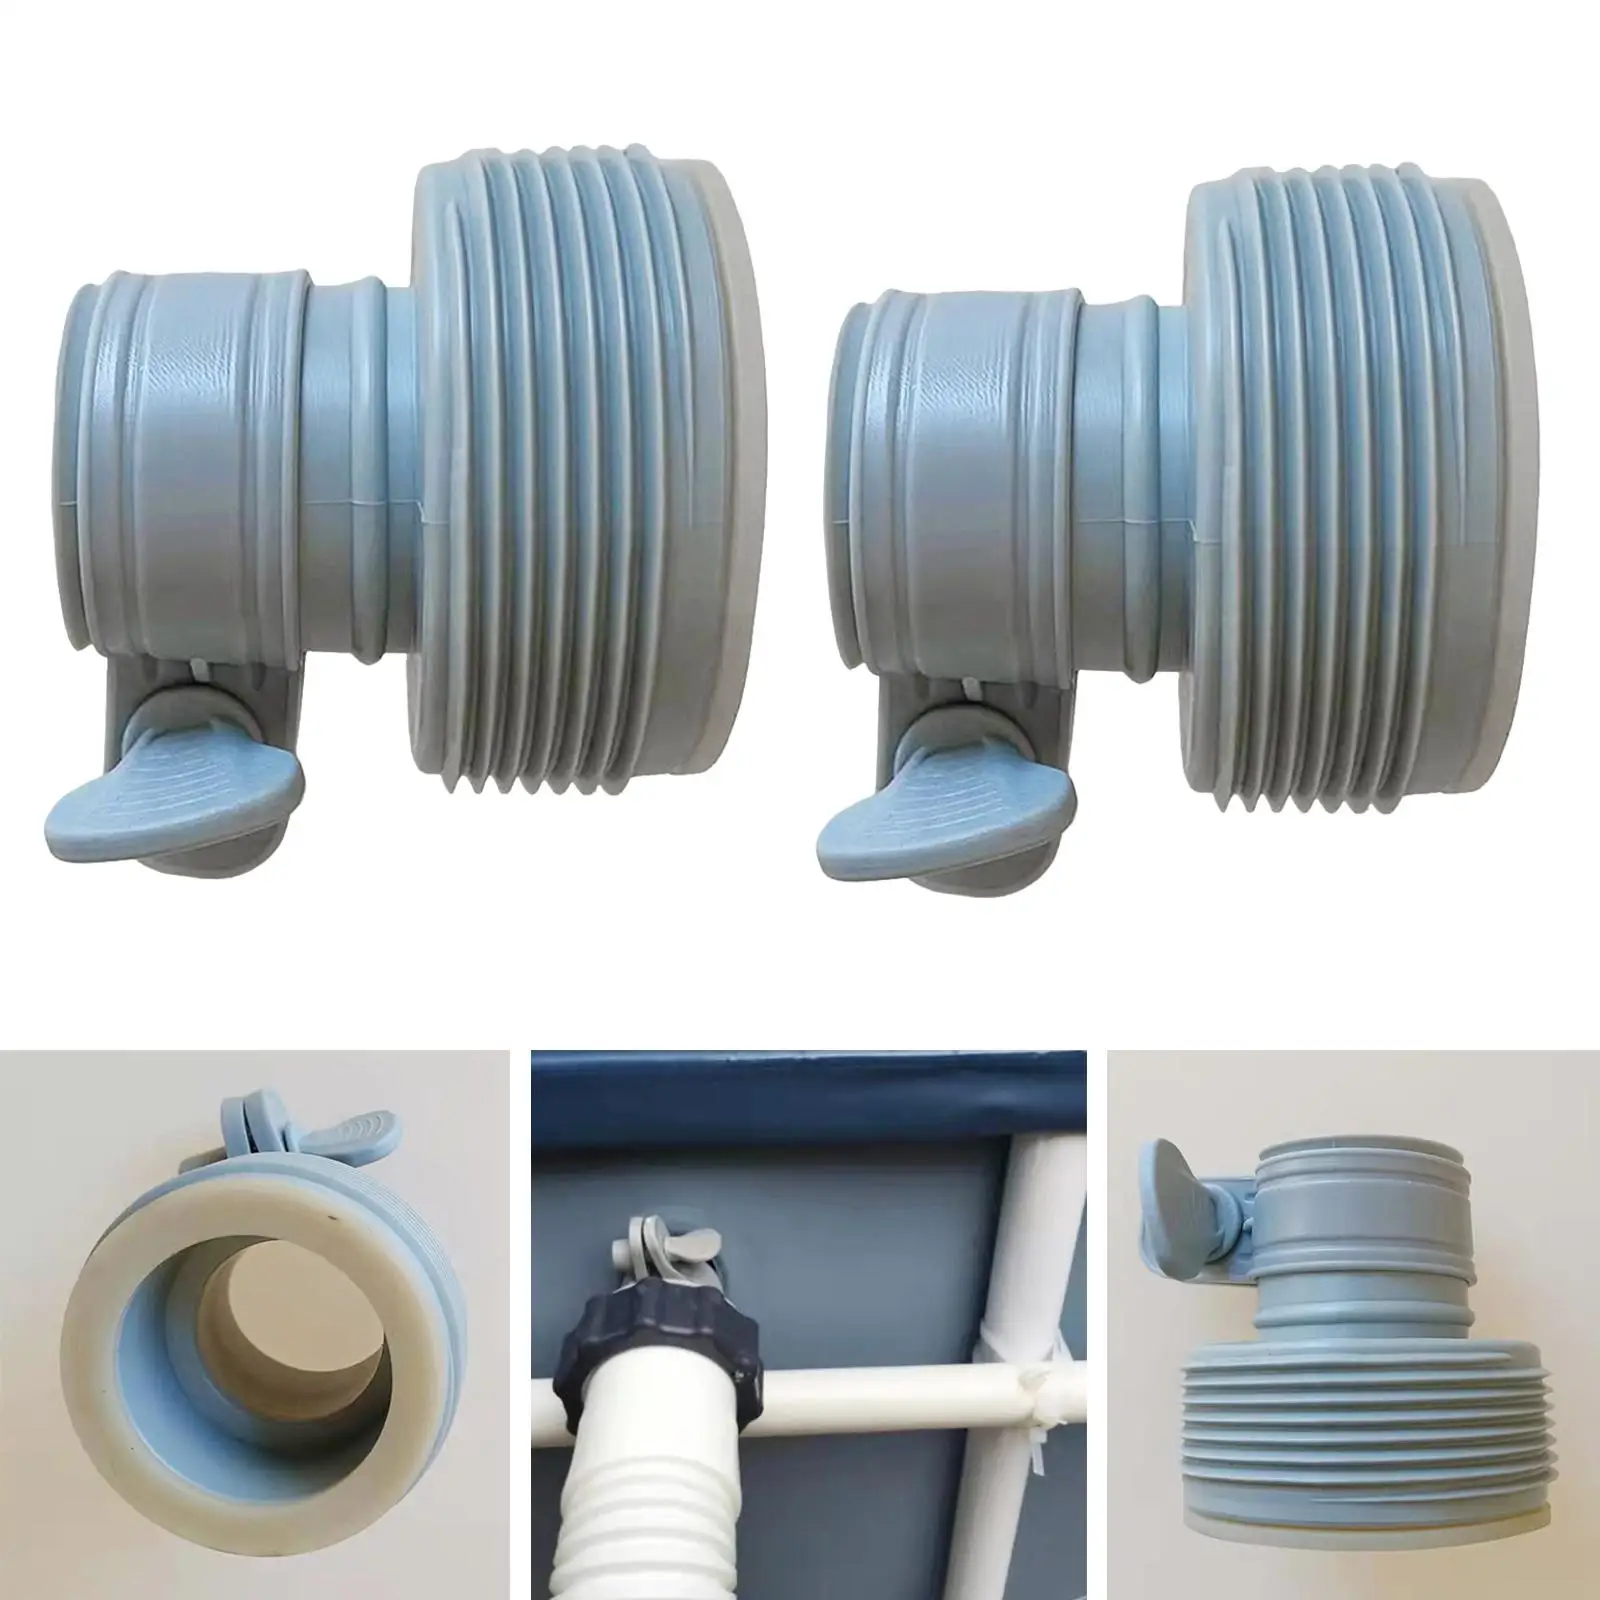 Hose Conversion Adapter B 1 Pair 1.25 Inches to 1.5 Inches Conversion Kit for Saltwater System